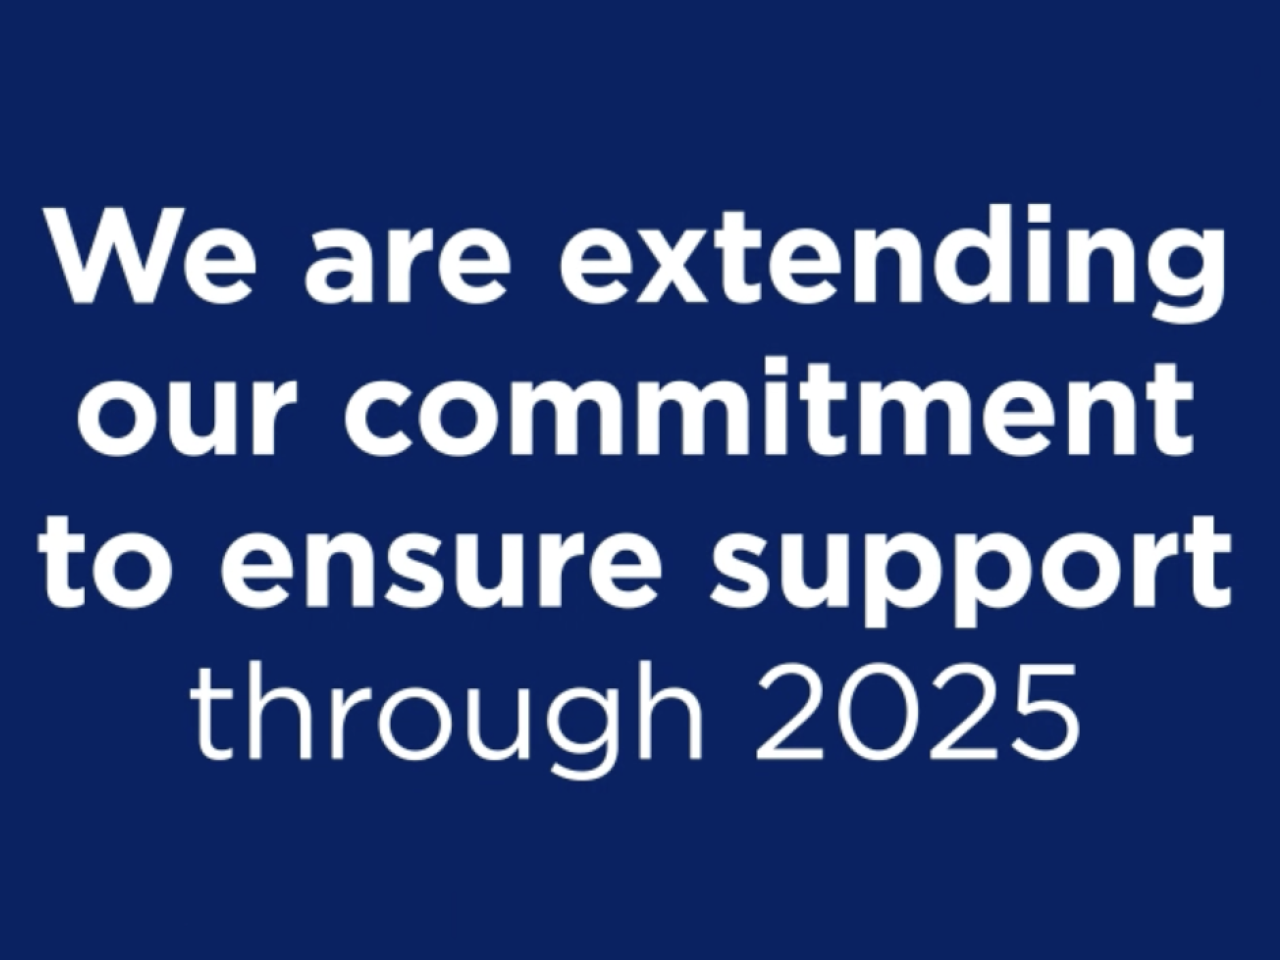 "We are extending our commitment to ensure support through 2025"